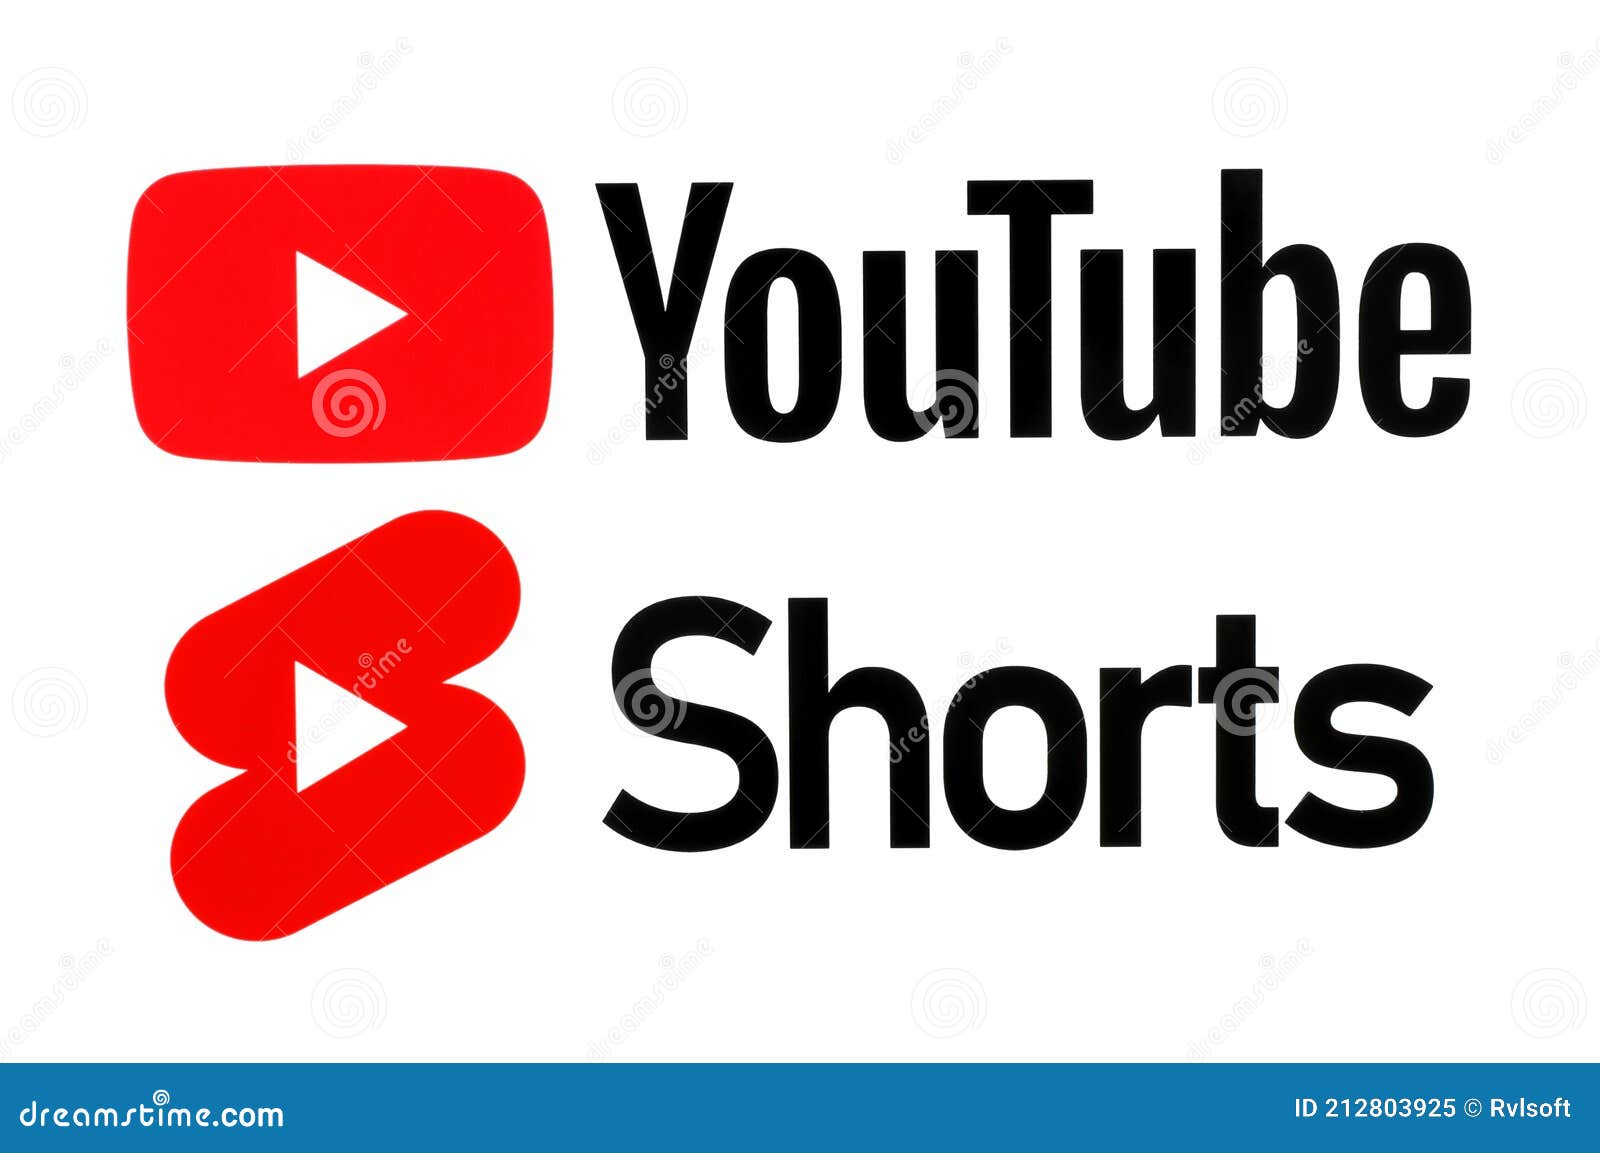 Youtube and Shorts Icons, Printed on Paper Editorial Image - Image of